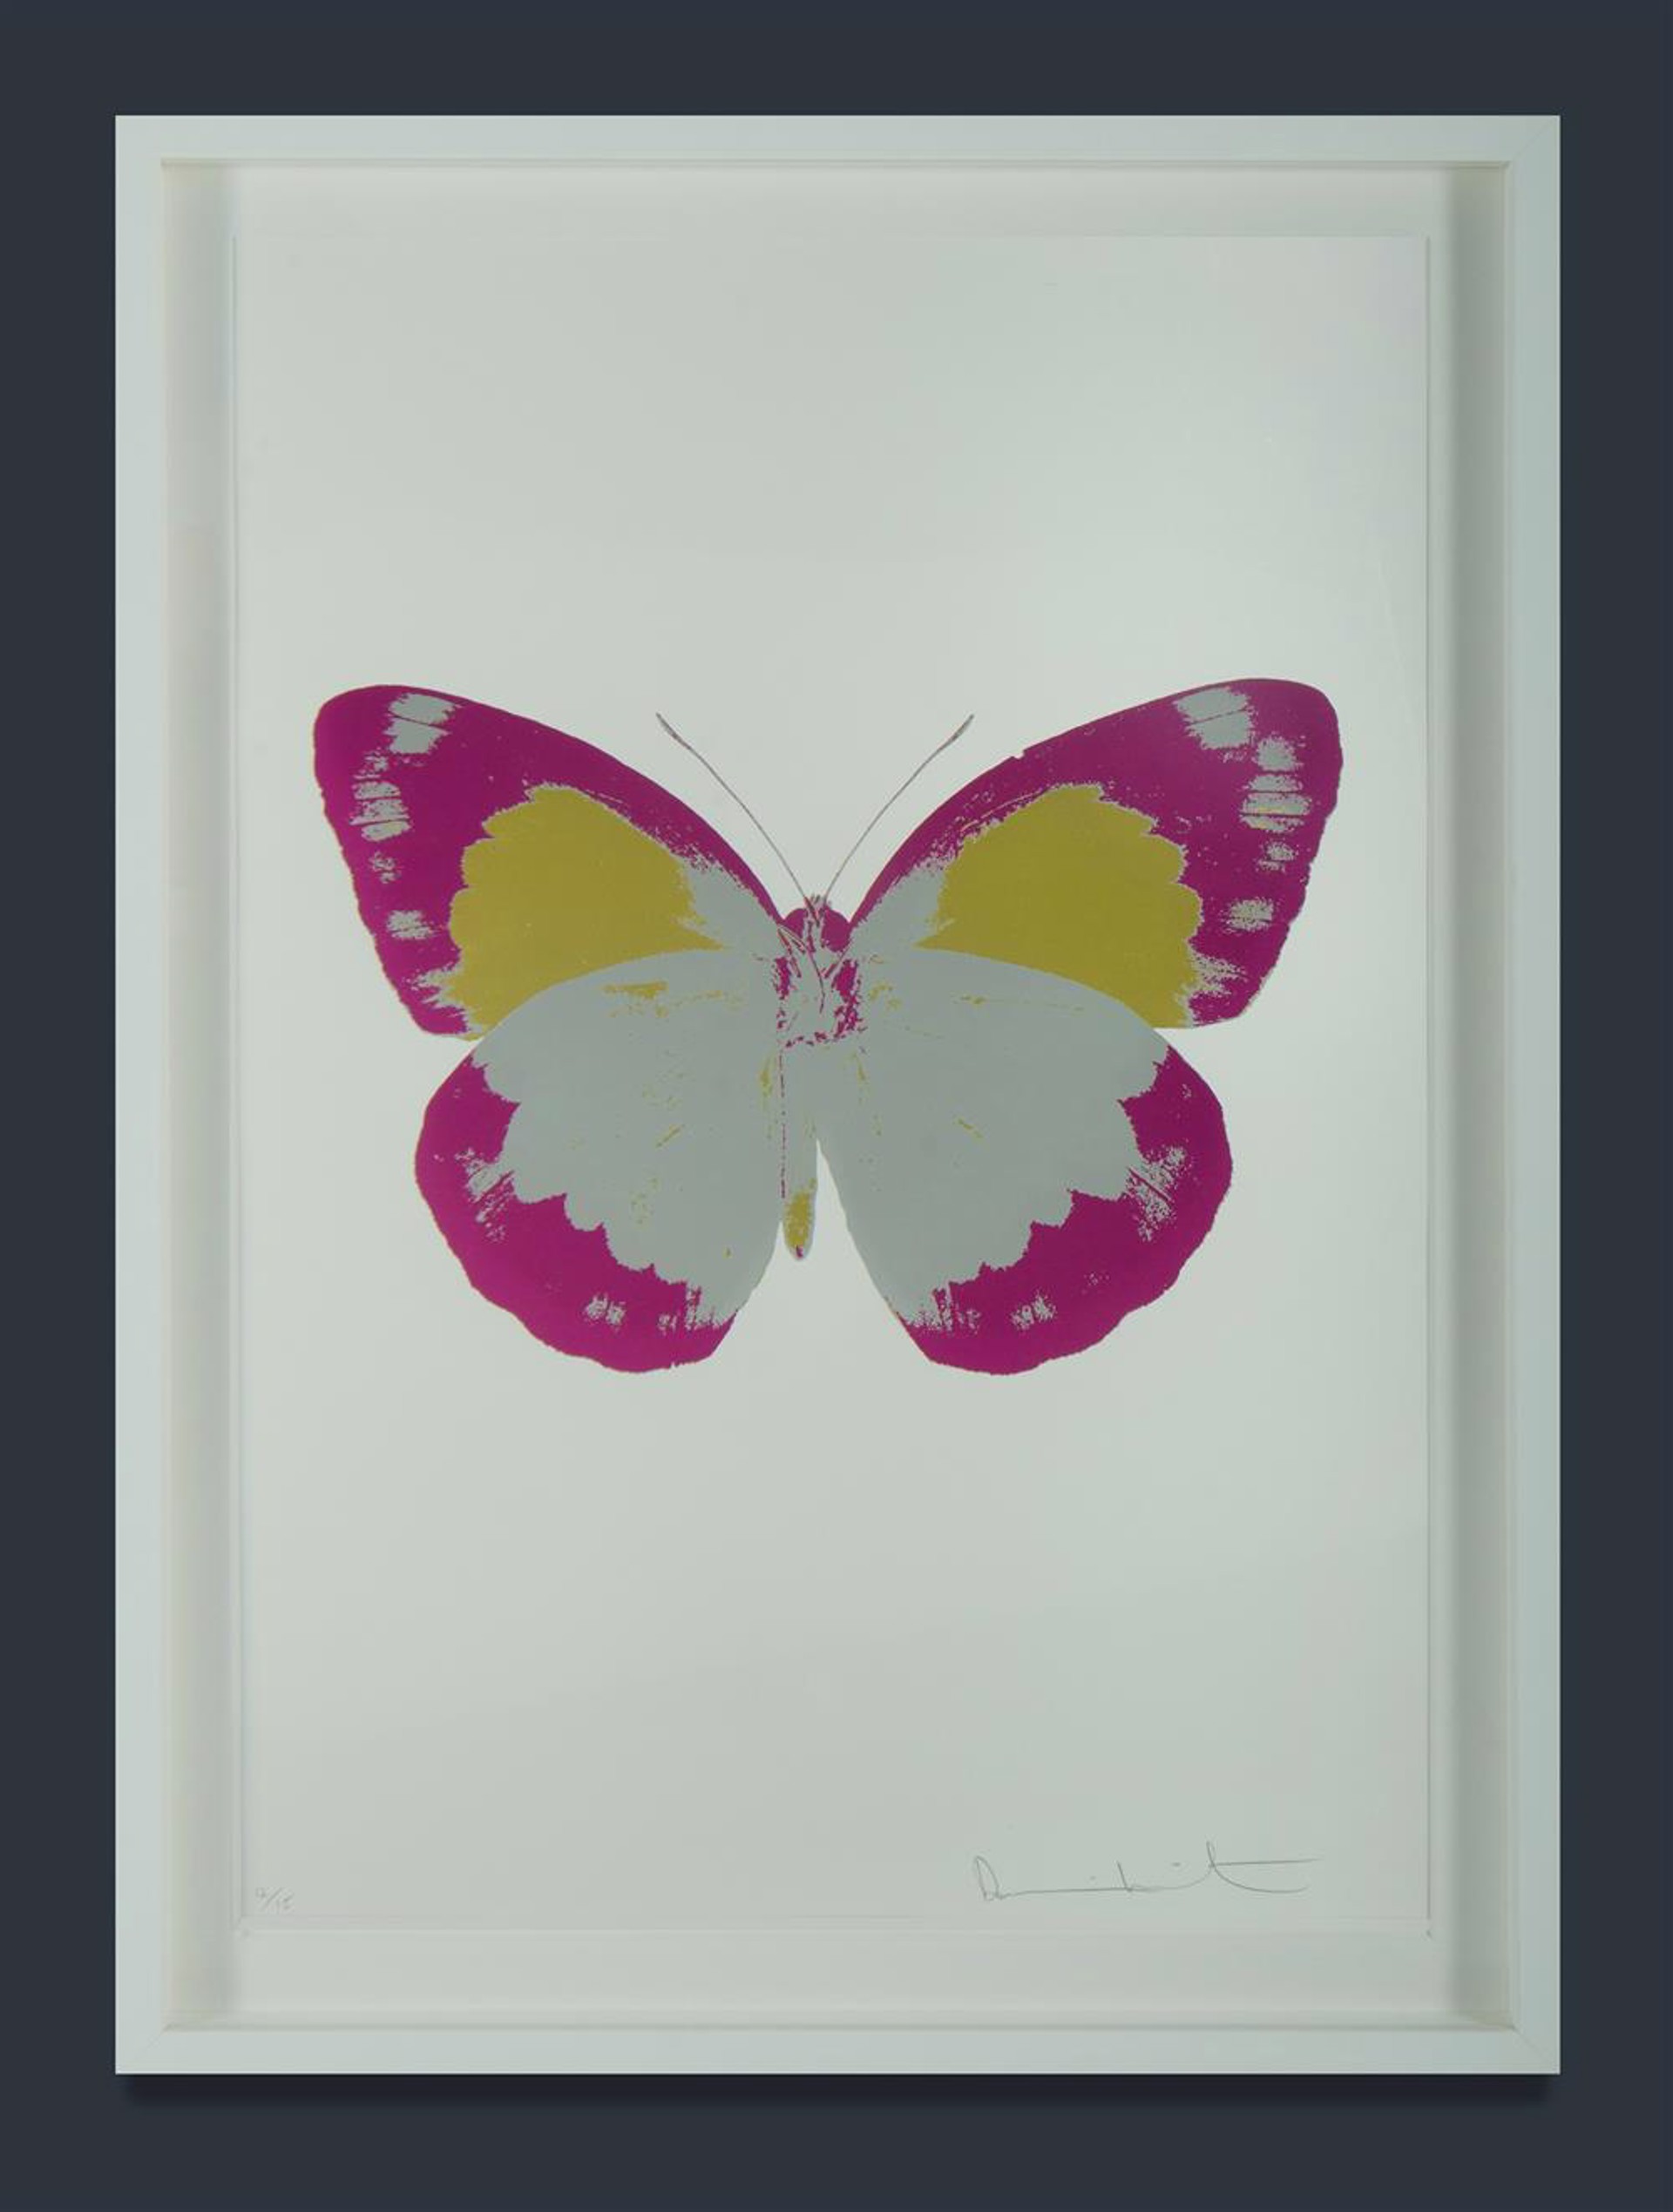 The Souls II (Silver Gloss, Fuchsia Pink, Oriental Gold) by Damien Hirst